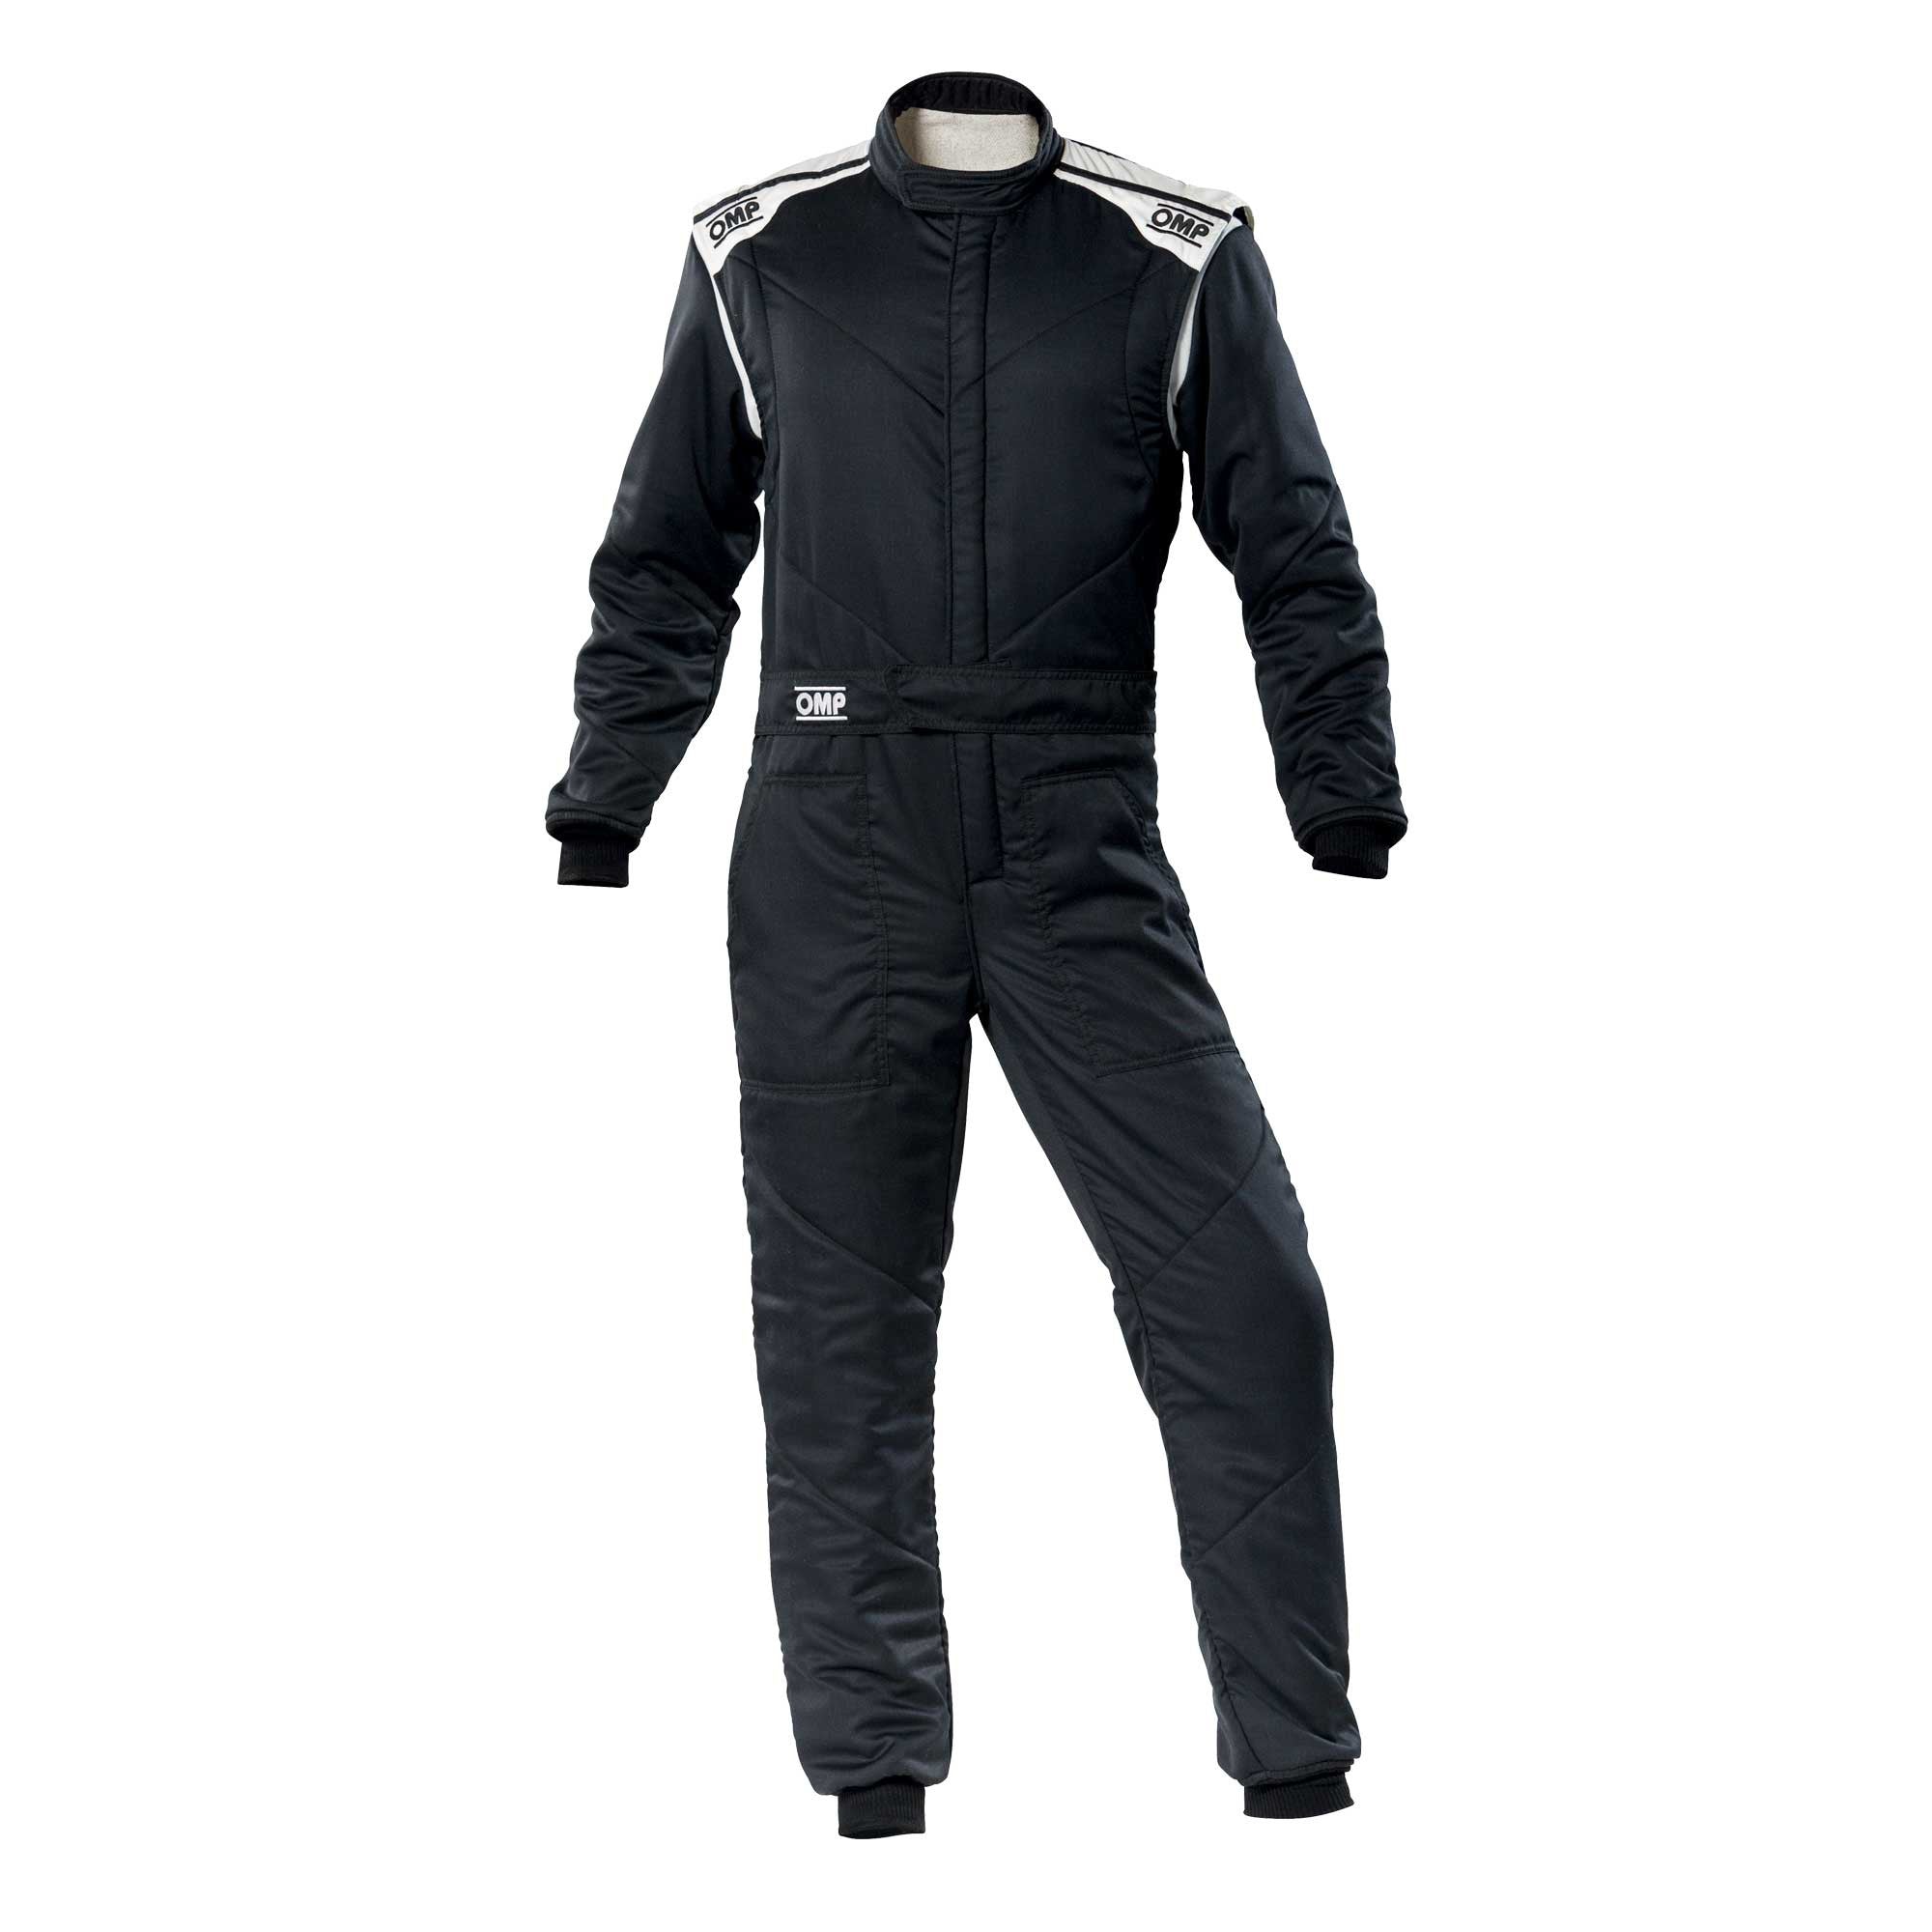 OMP NOMEX RACING SUIT FIRST-S | Professional Car Racing Suit Supplier Ontario